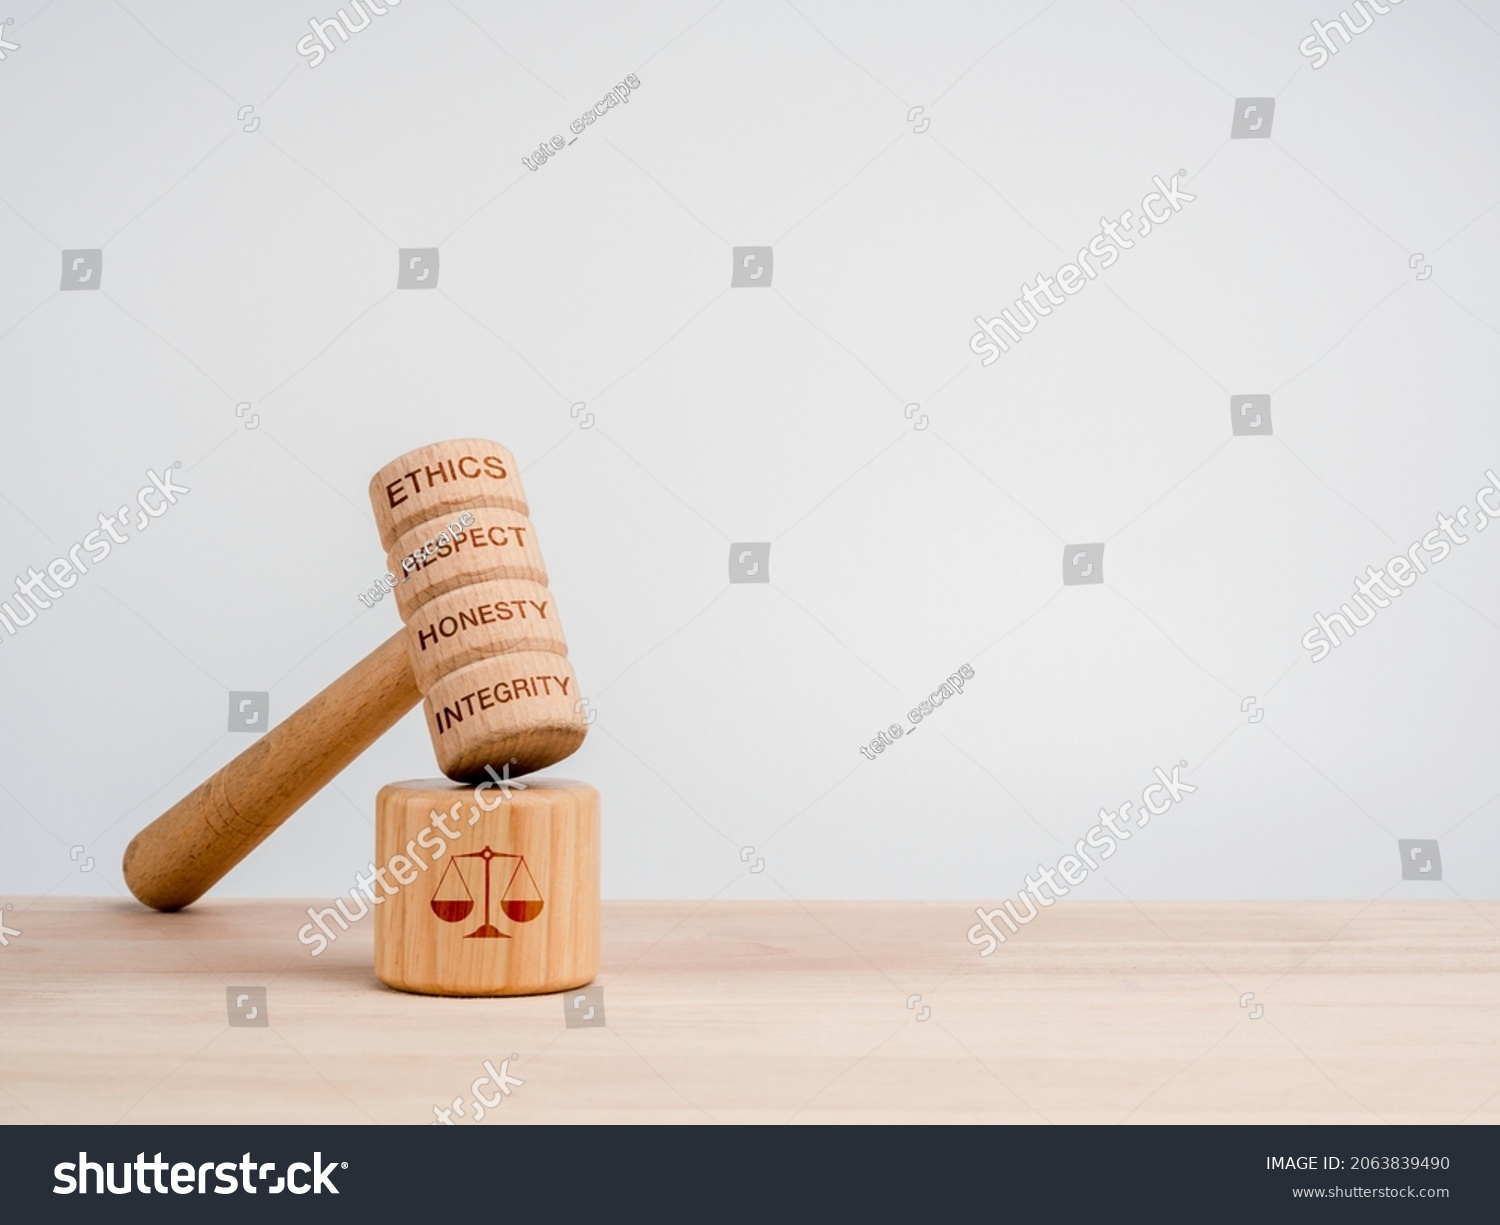 A wooden judge gavel with words, ethics, respect, honesty, and integrity with the soundboard with scales icon, toys on wooden table, white background with copy space, minimal style. Justice concept. #2063839490